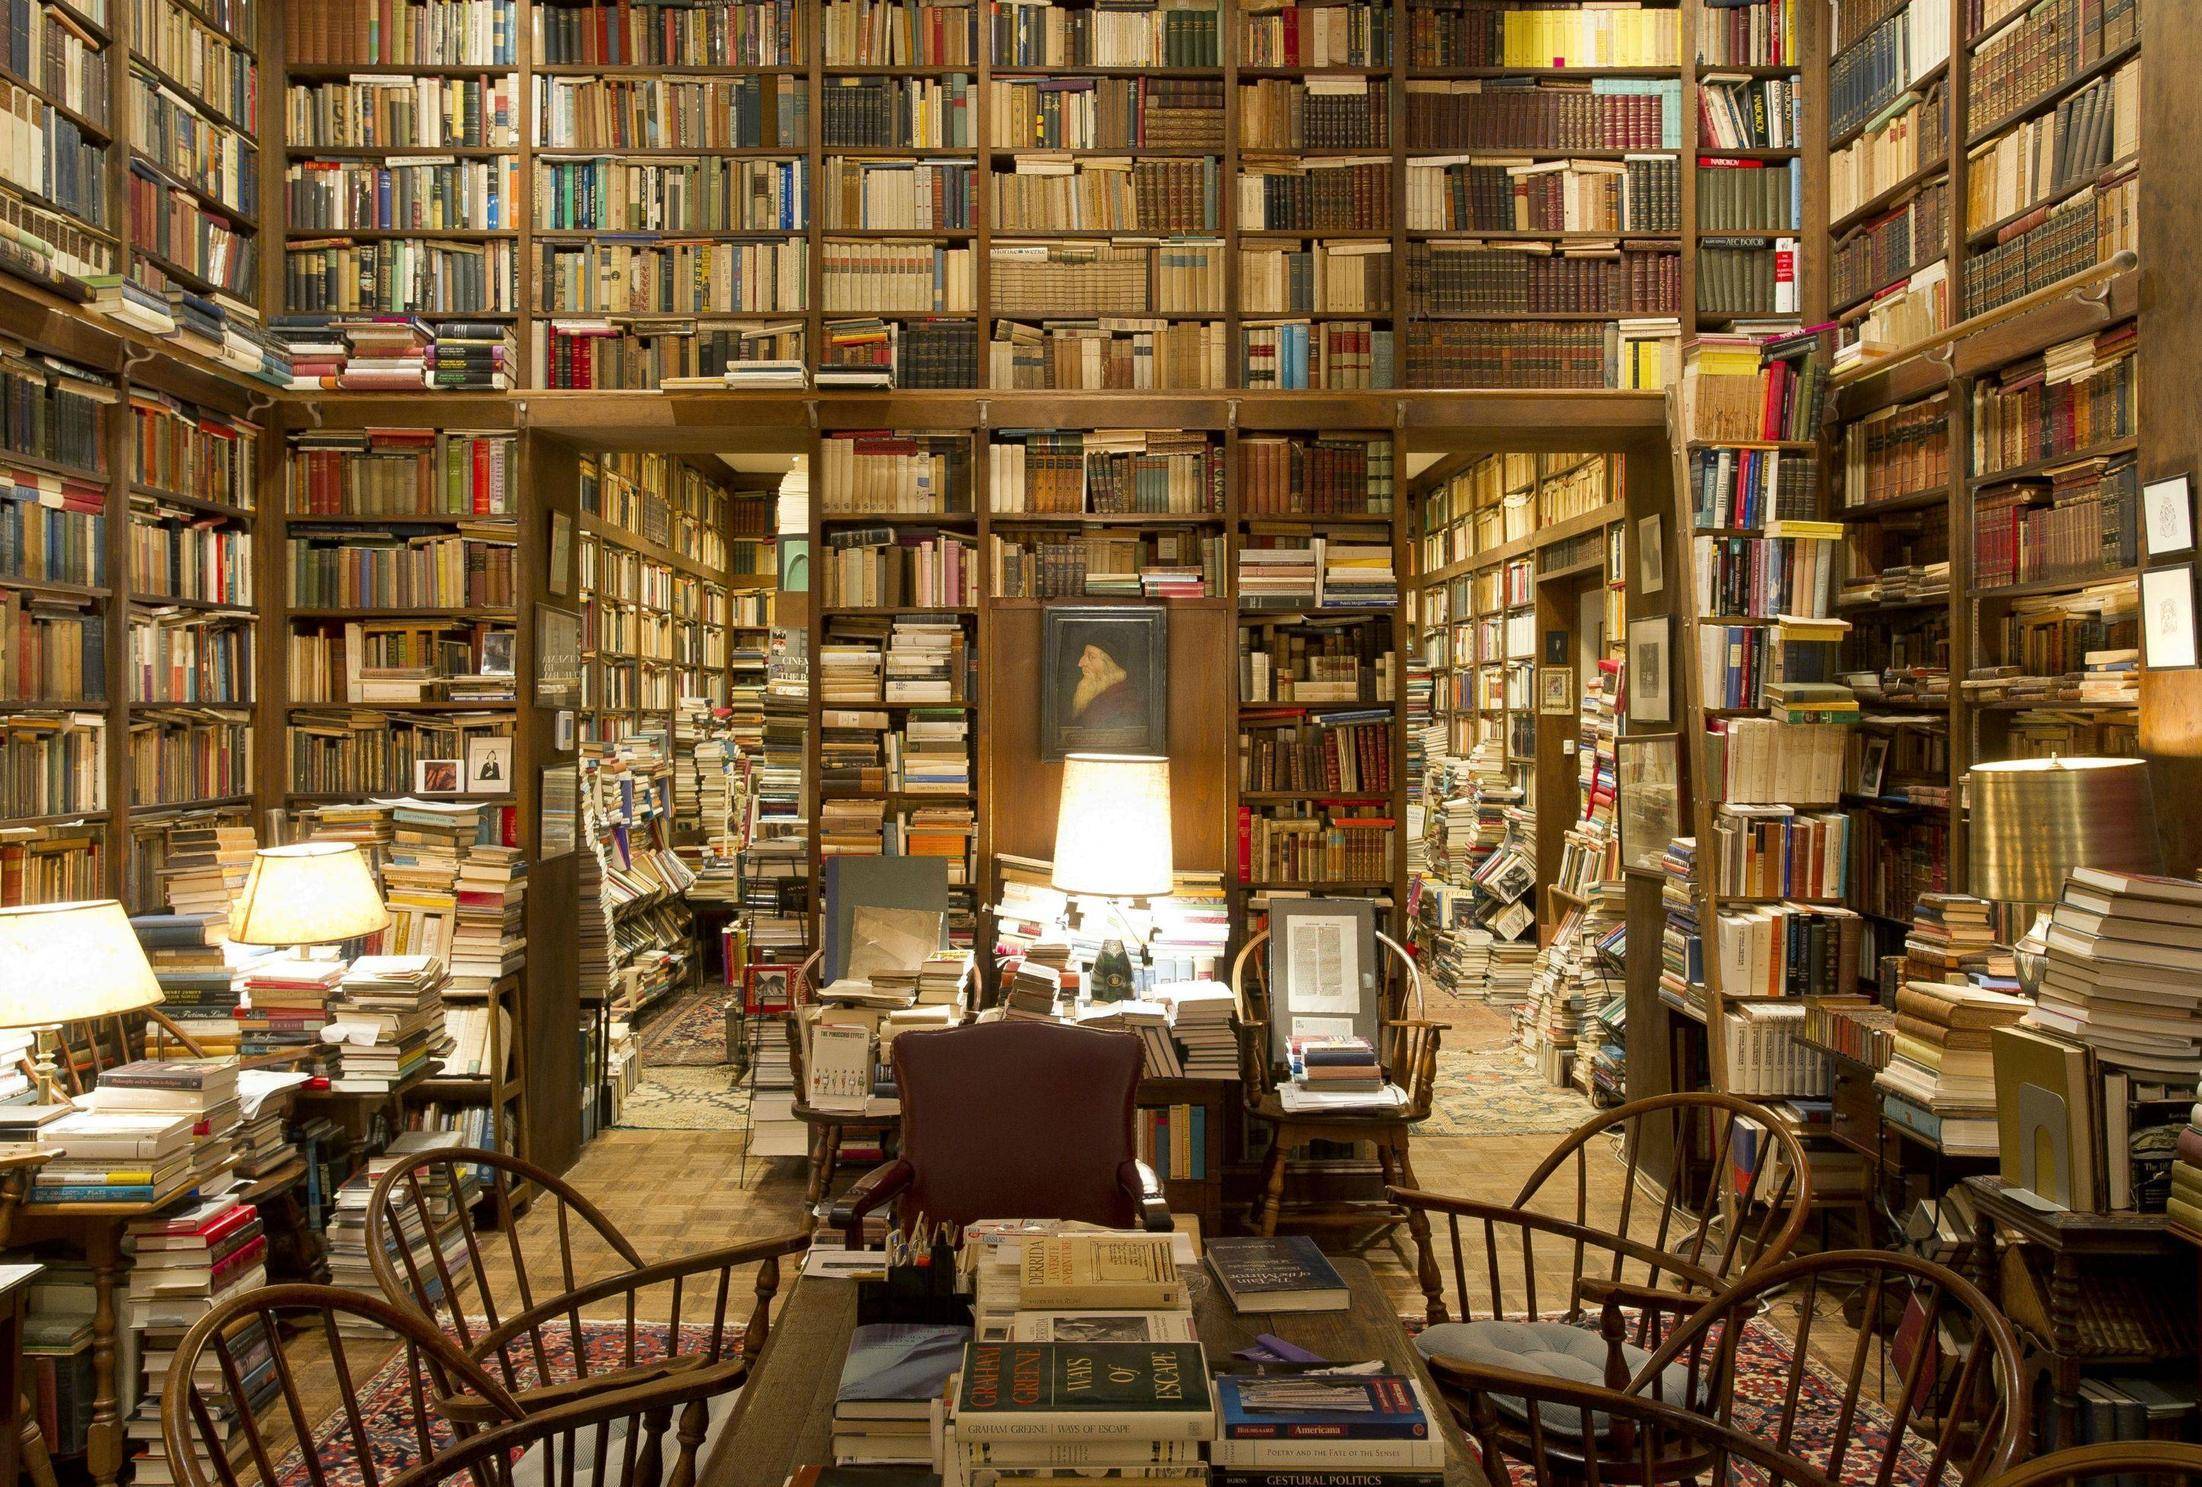 This would be my living room if we didn't have ebooks.